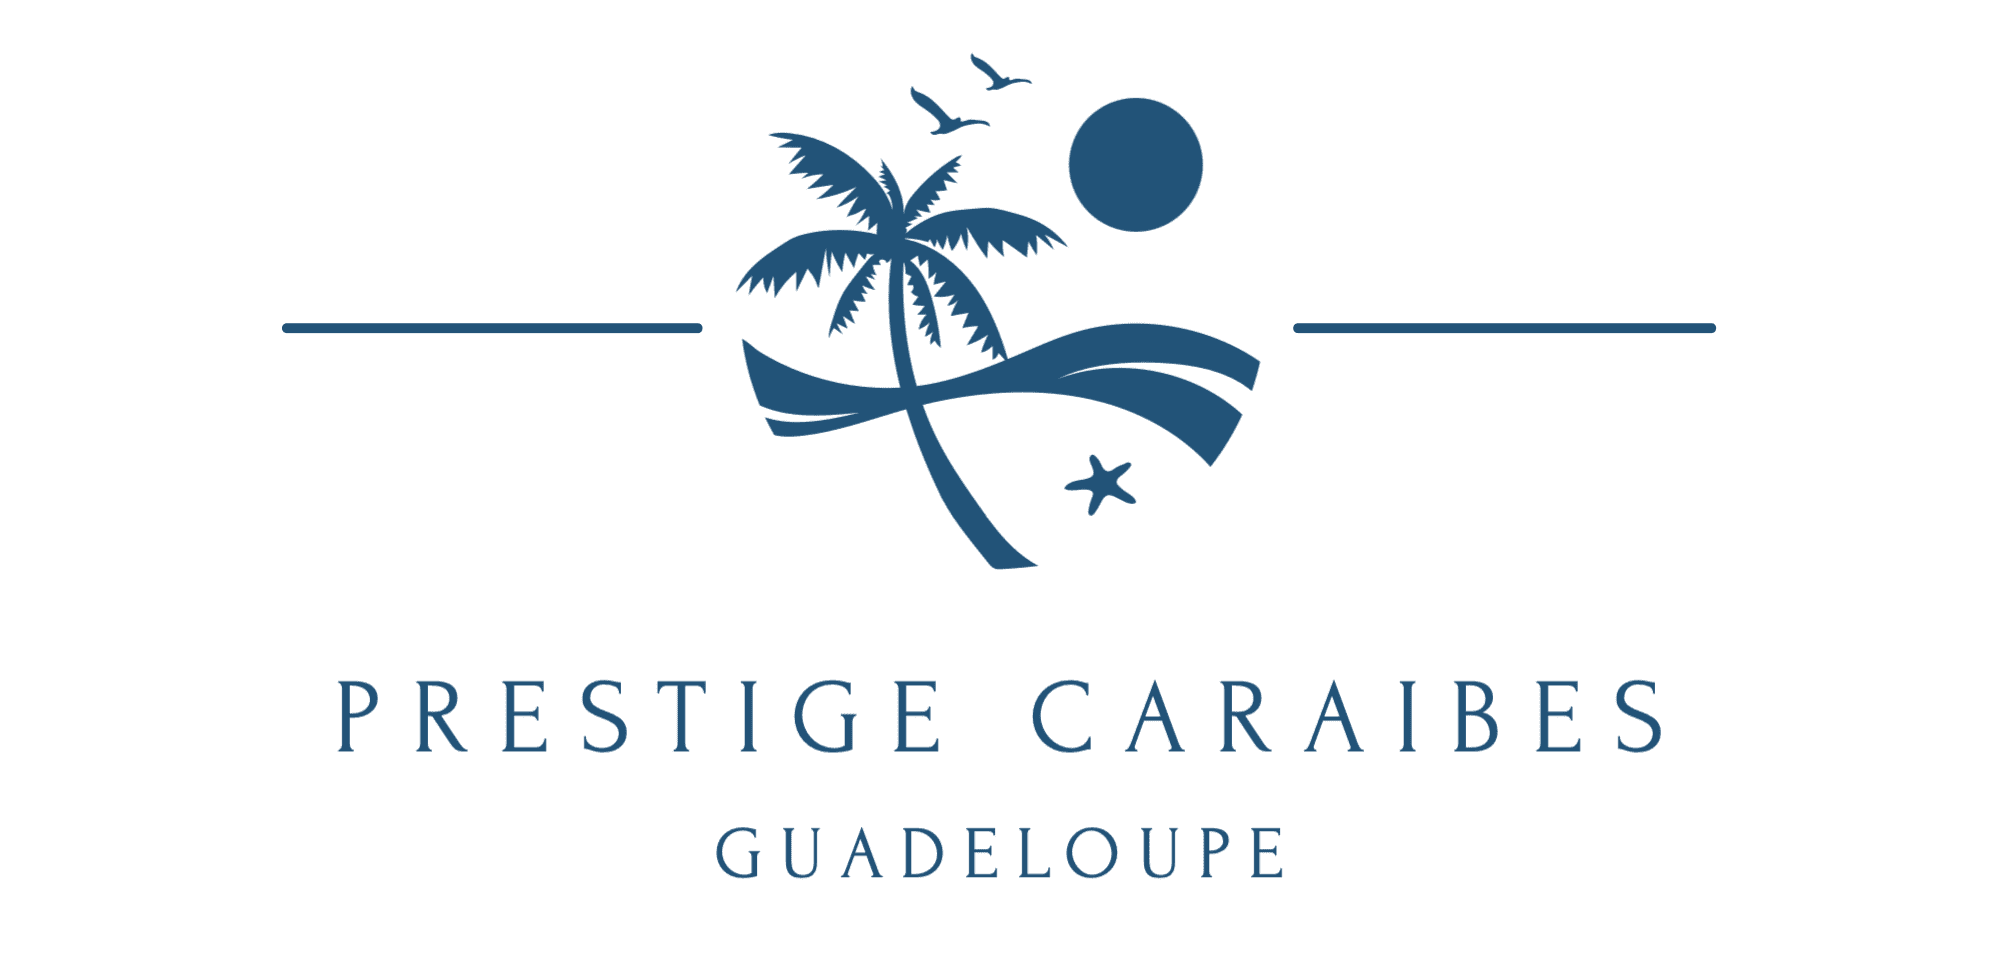 voyage caraibes luxe